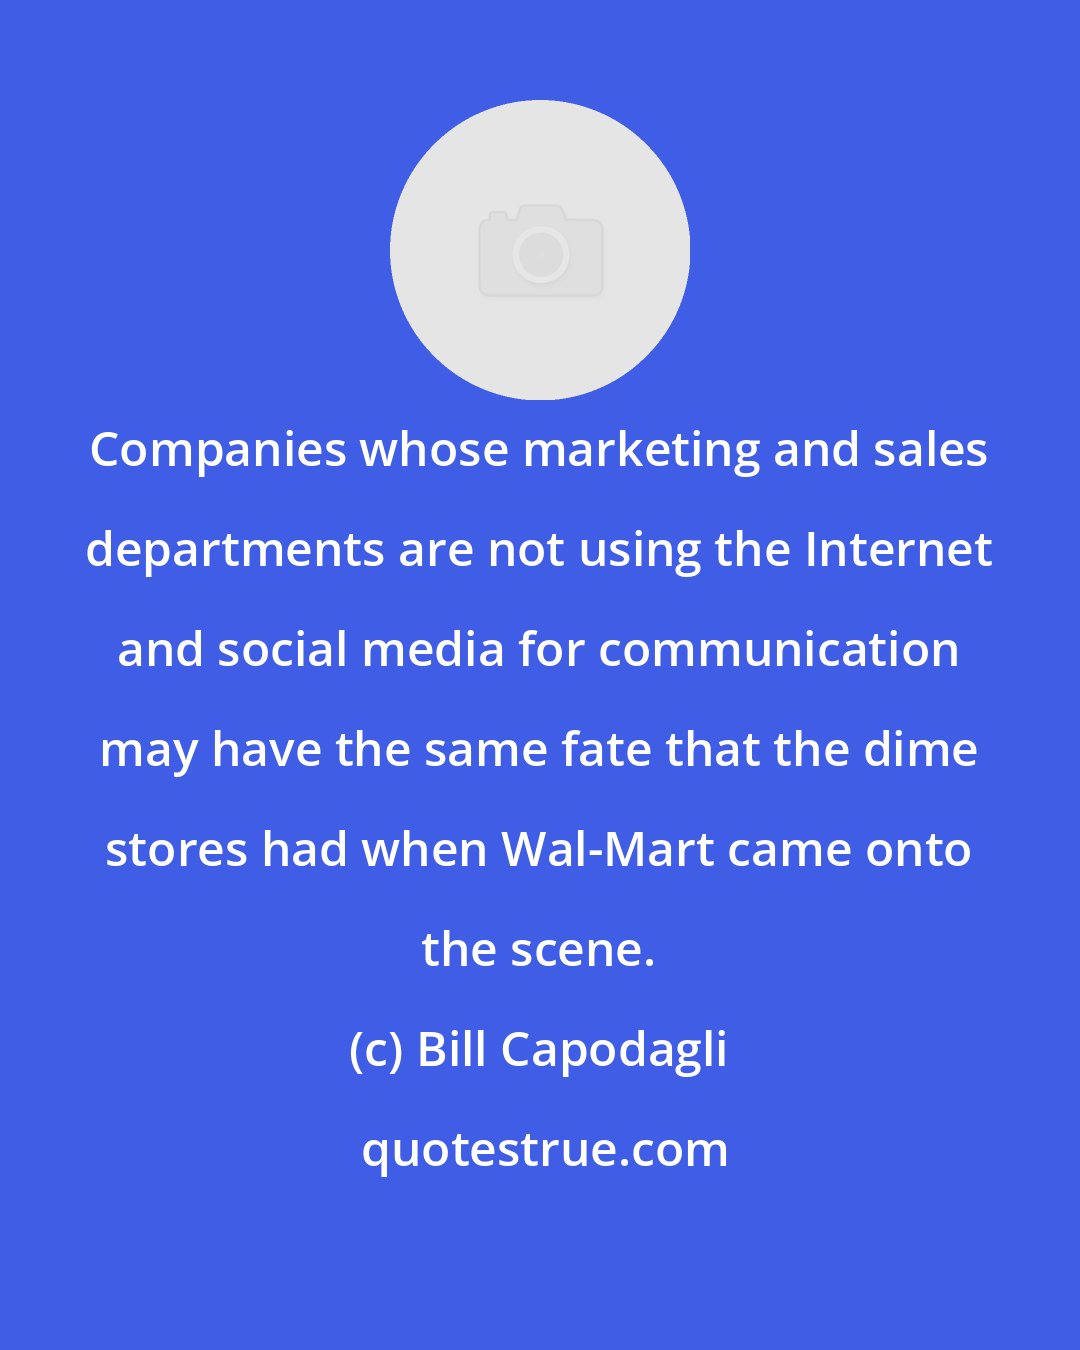 Bill Capodagli: Companies whose marketing and sales departments are not using the Internet and social media for communication may have the same fate that the dime stores had when Wal-Mart came onto the scene.